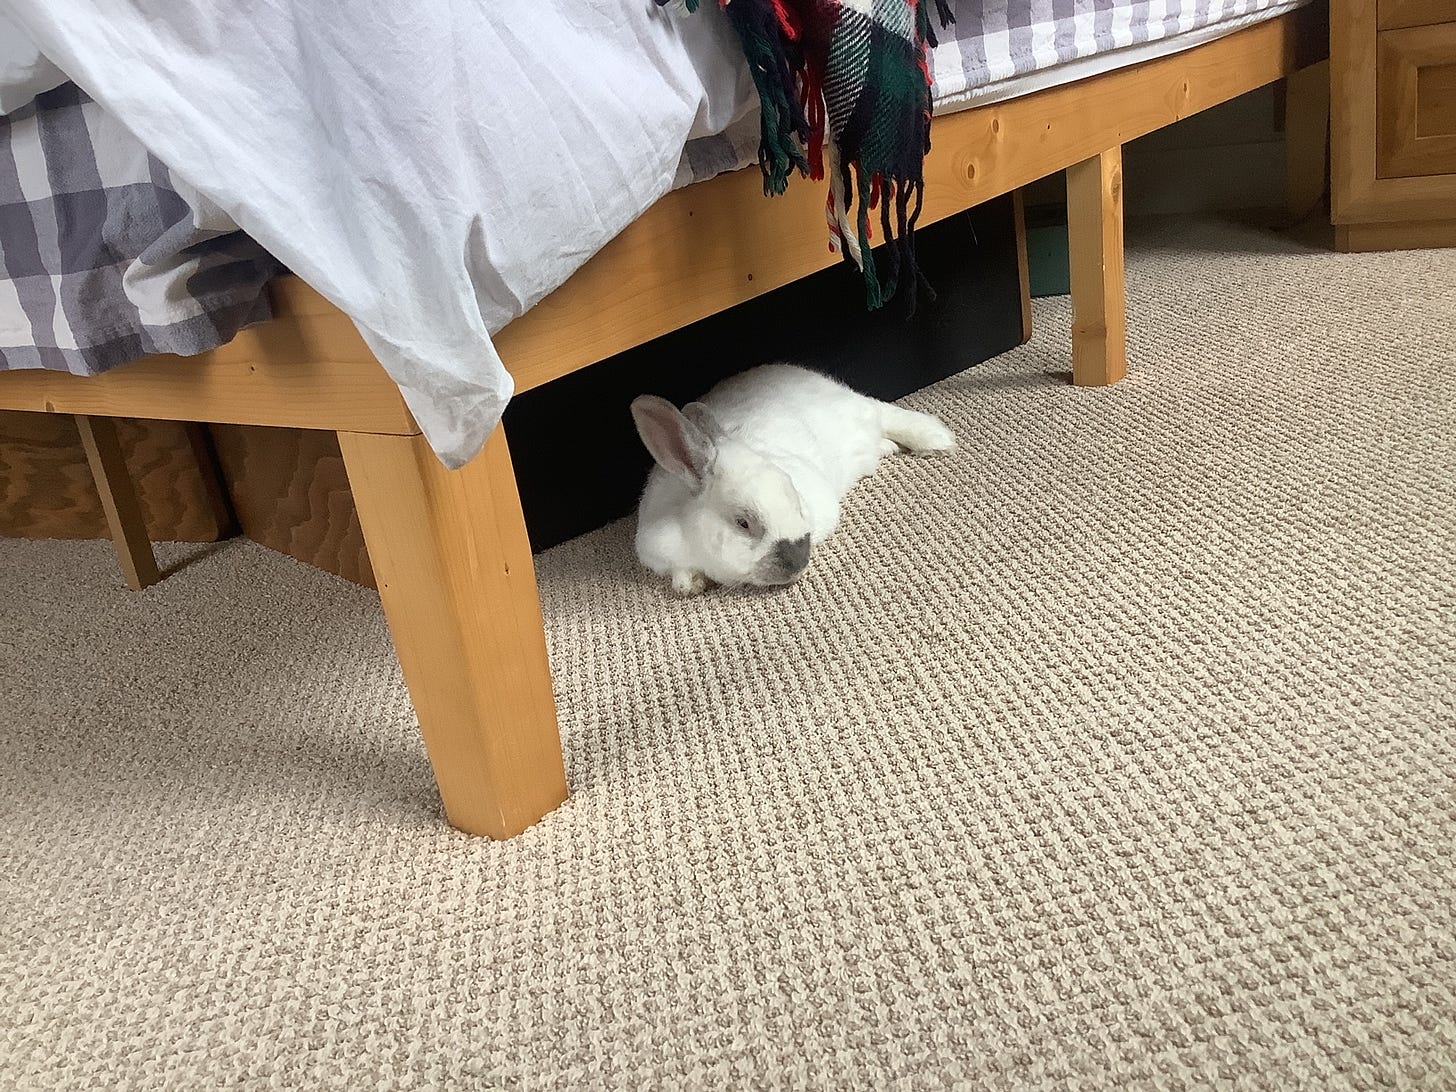 A white bunny lies on a beige carpet under a bed. His head is on his paws.